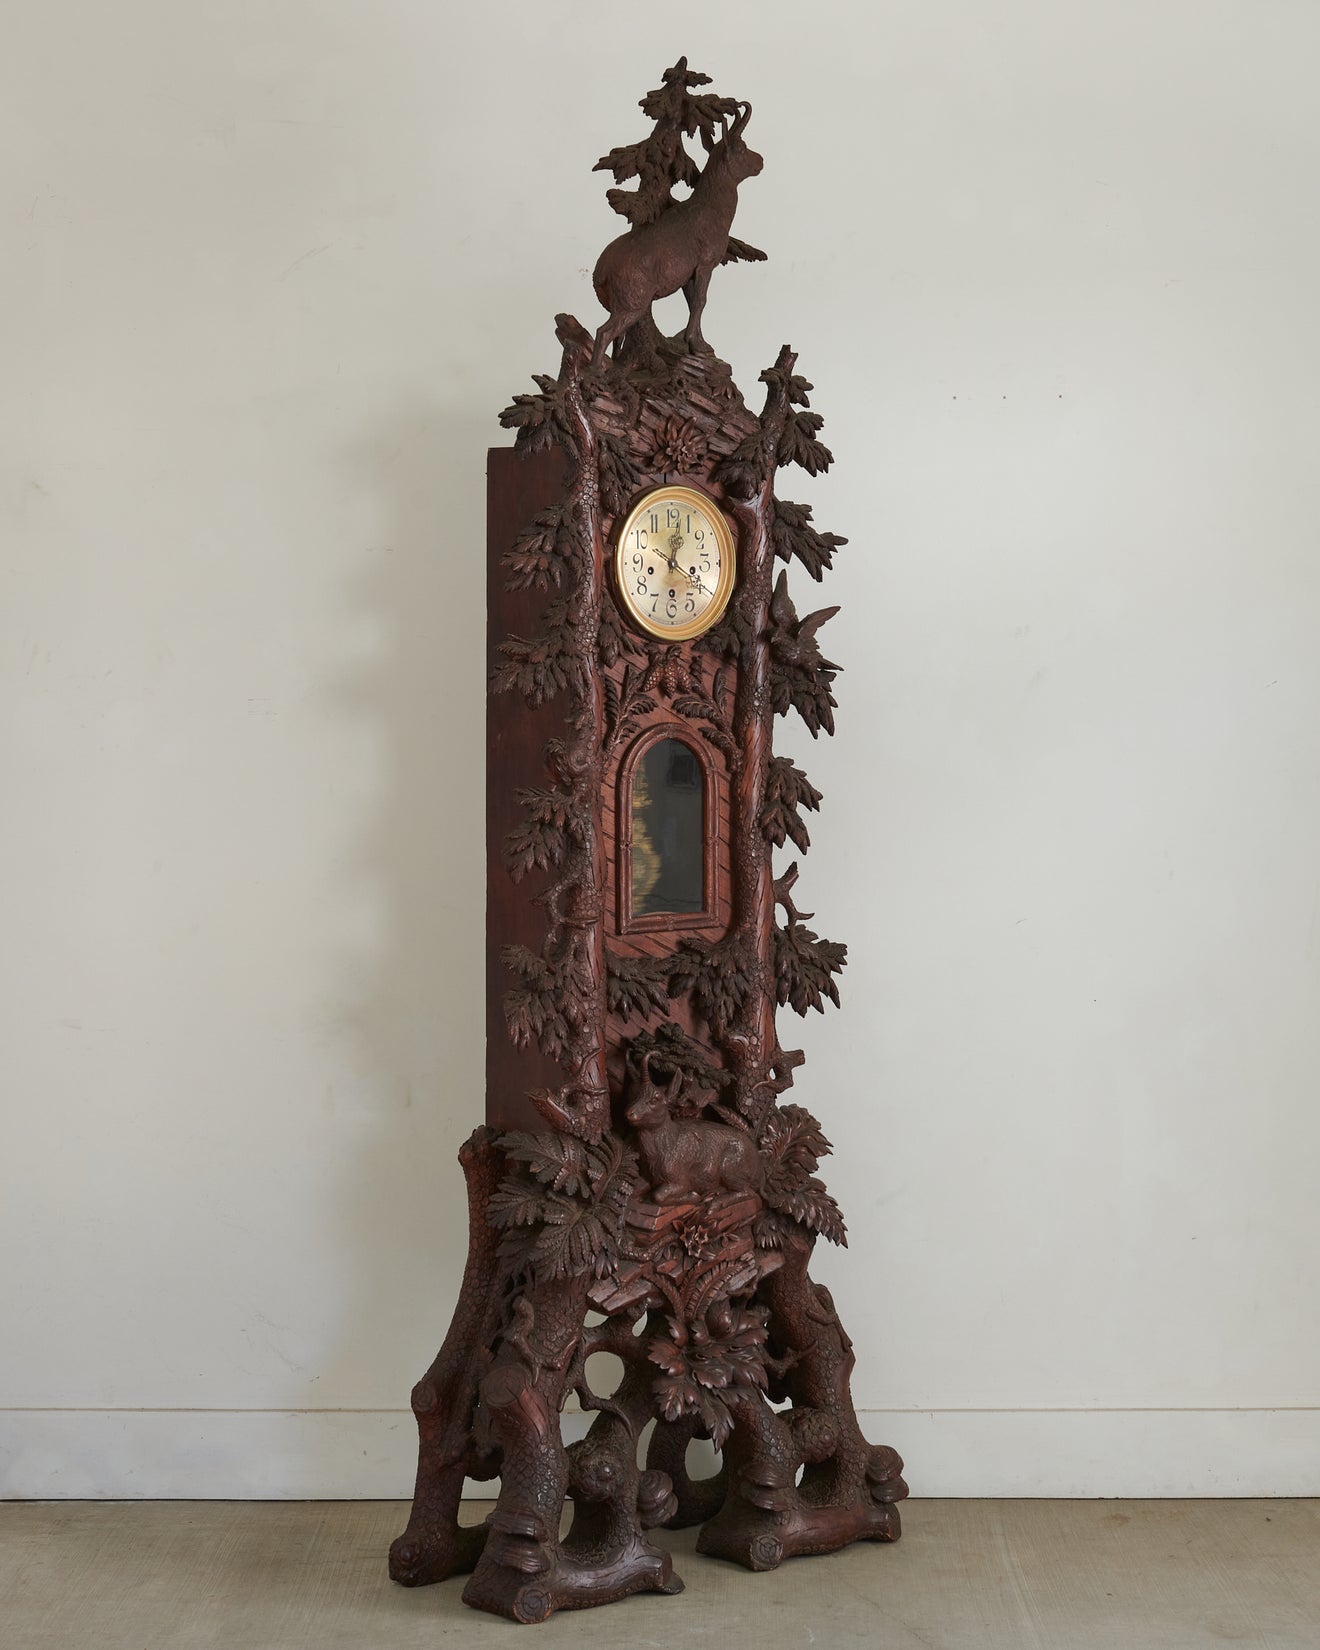 MAGNIFICENT BLACK FOREST CARVED WALNUT GRANDFATHER CLOCK